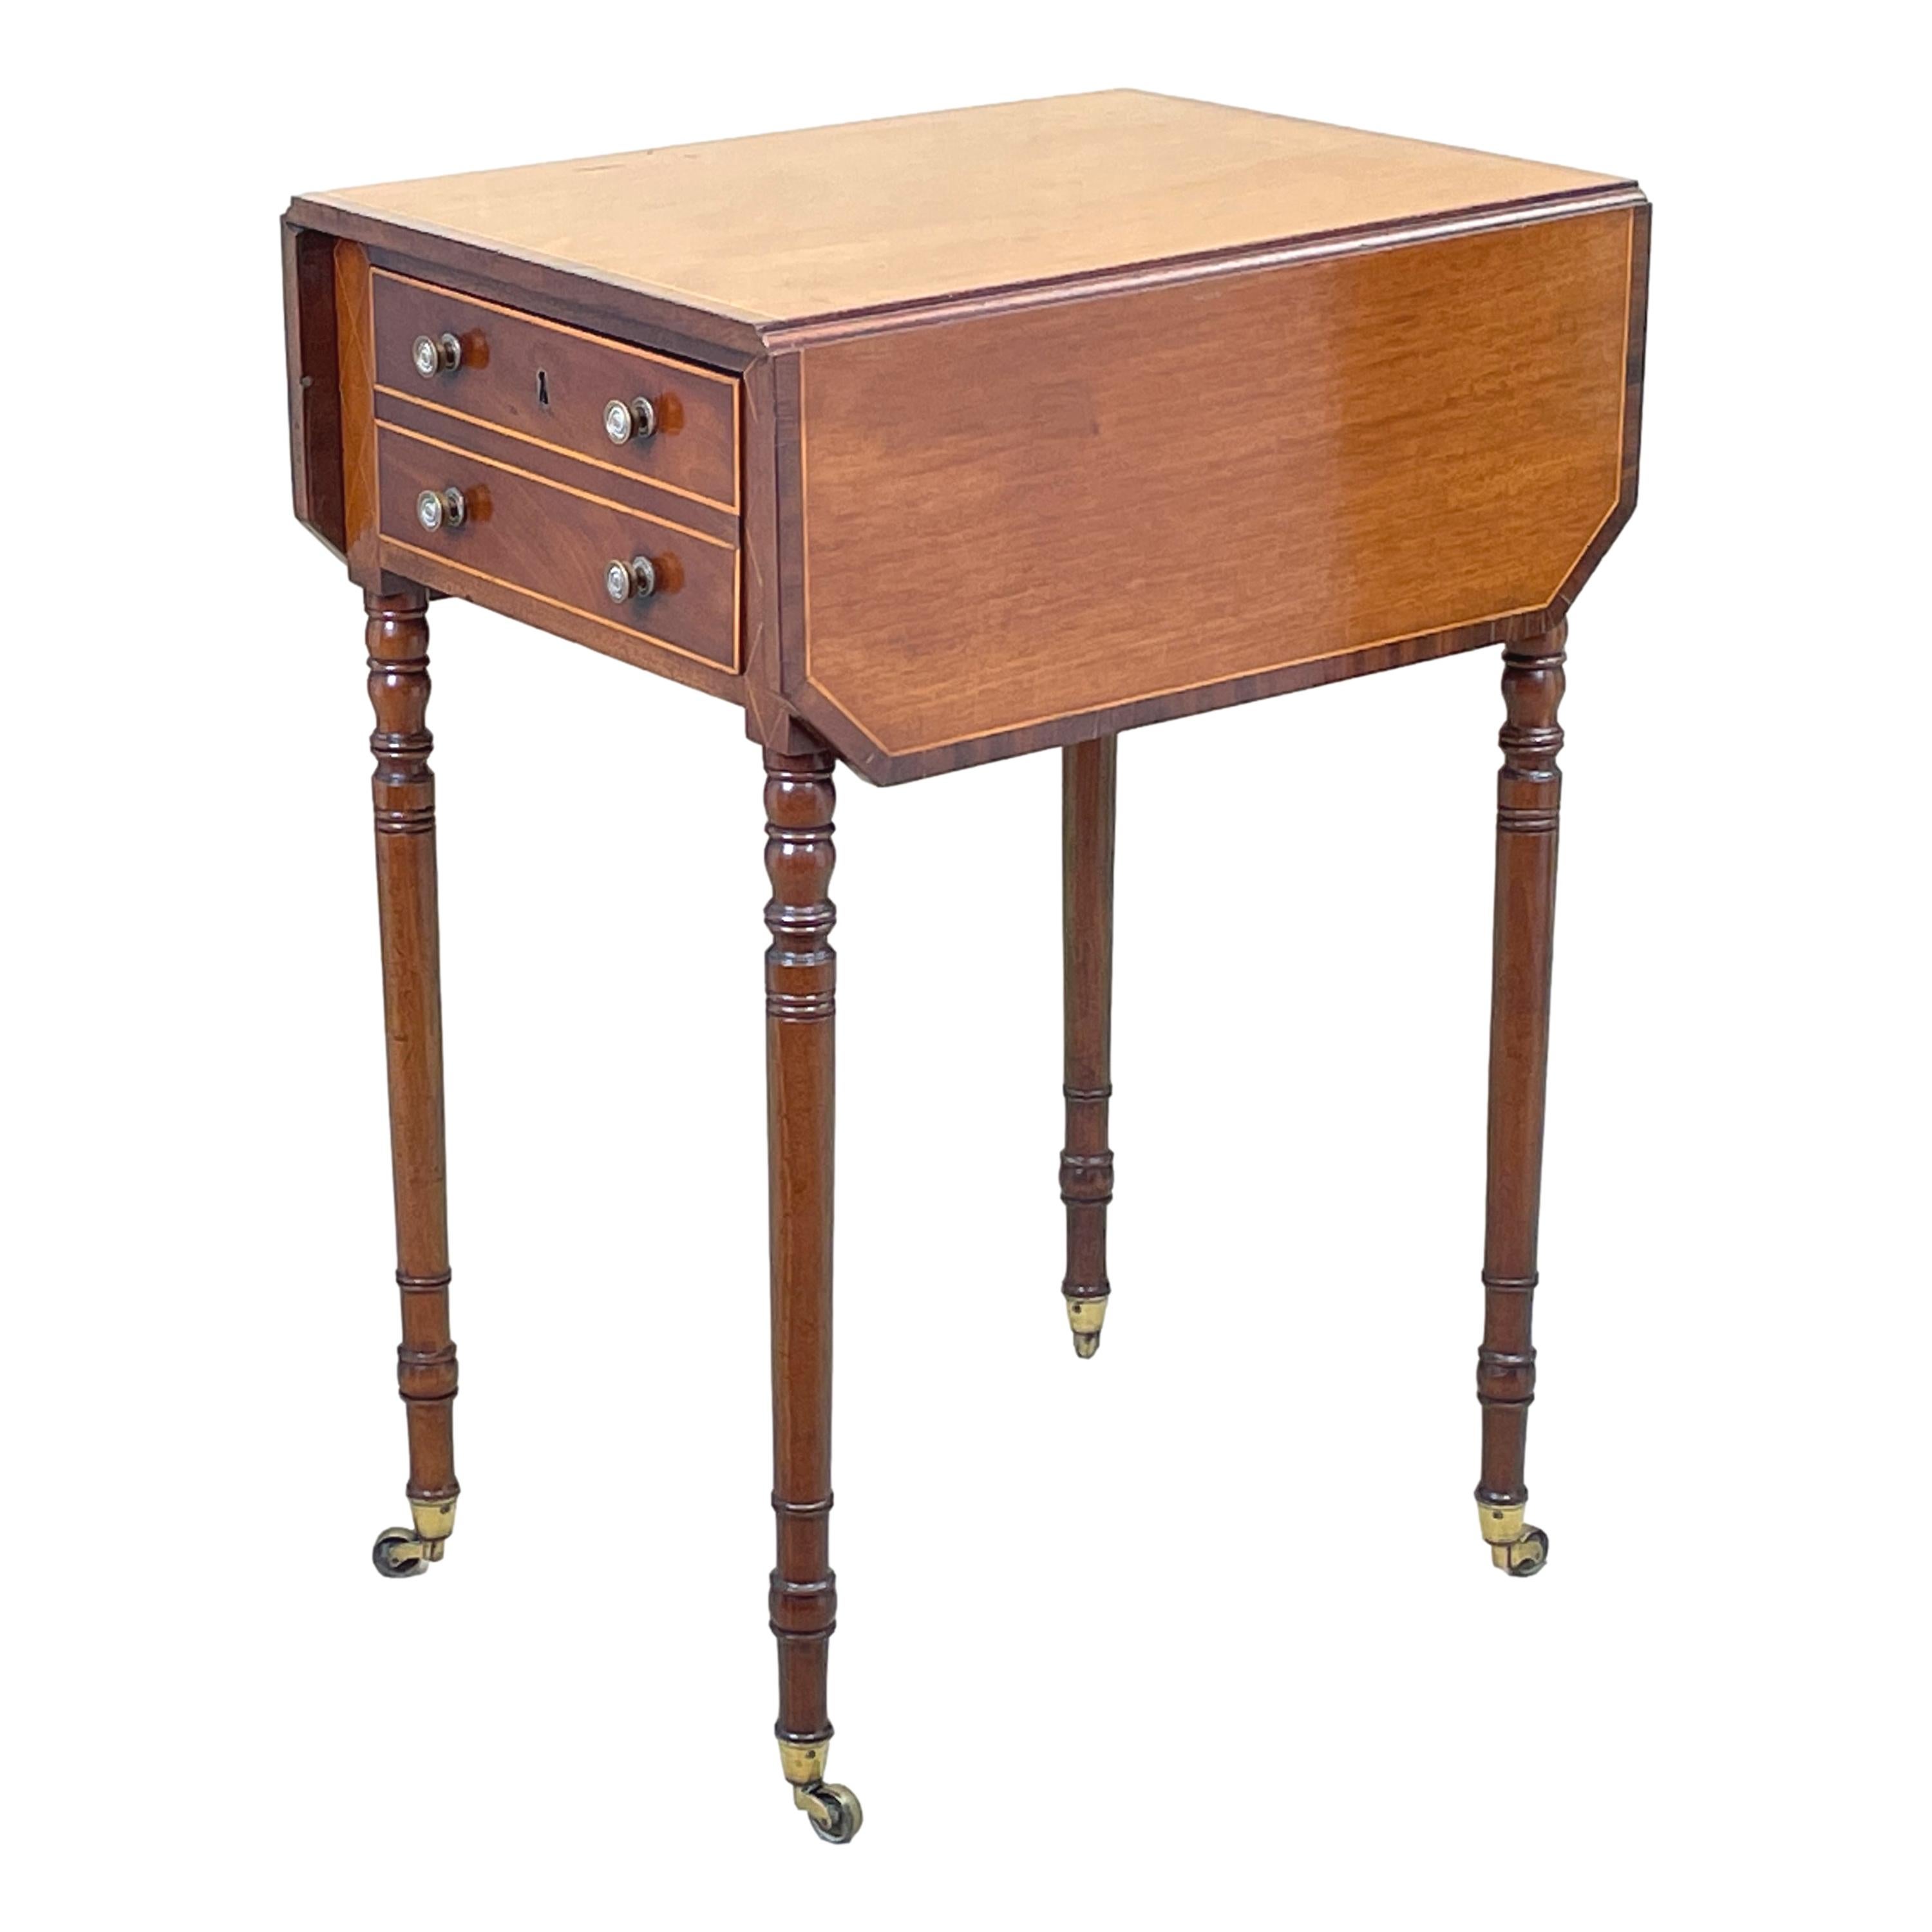 An early 19th century Georgian mahogany baby pembroke table
having shaped and crossbanded two flap top above frieze drawers
to front and reverse with inlaid decoration raised on elegant
turned legs

(Pembroke tables became one of the most popular